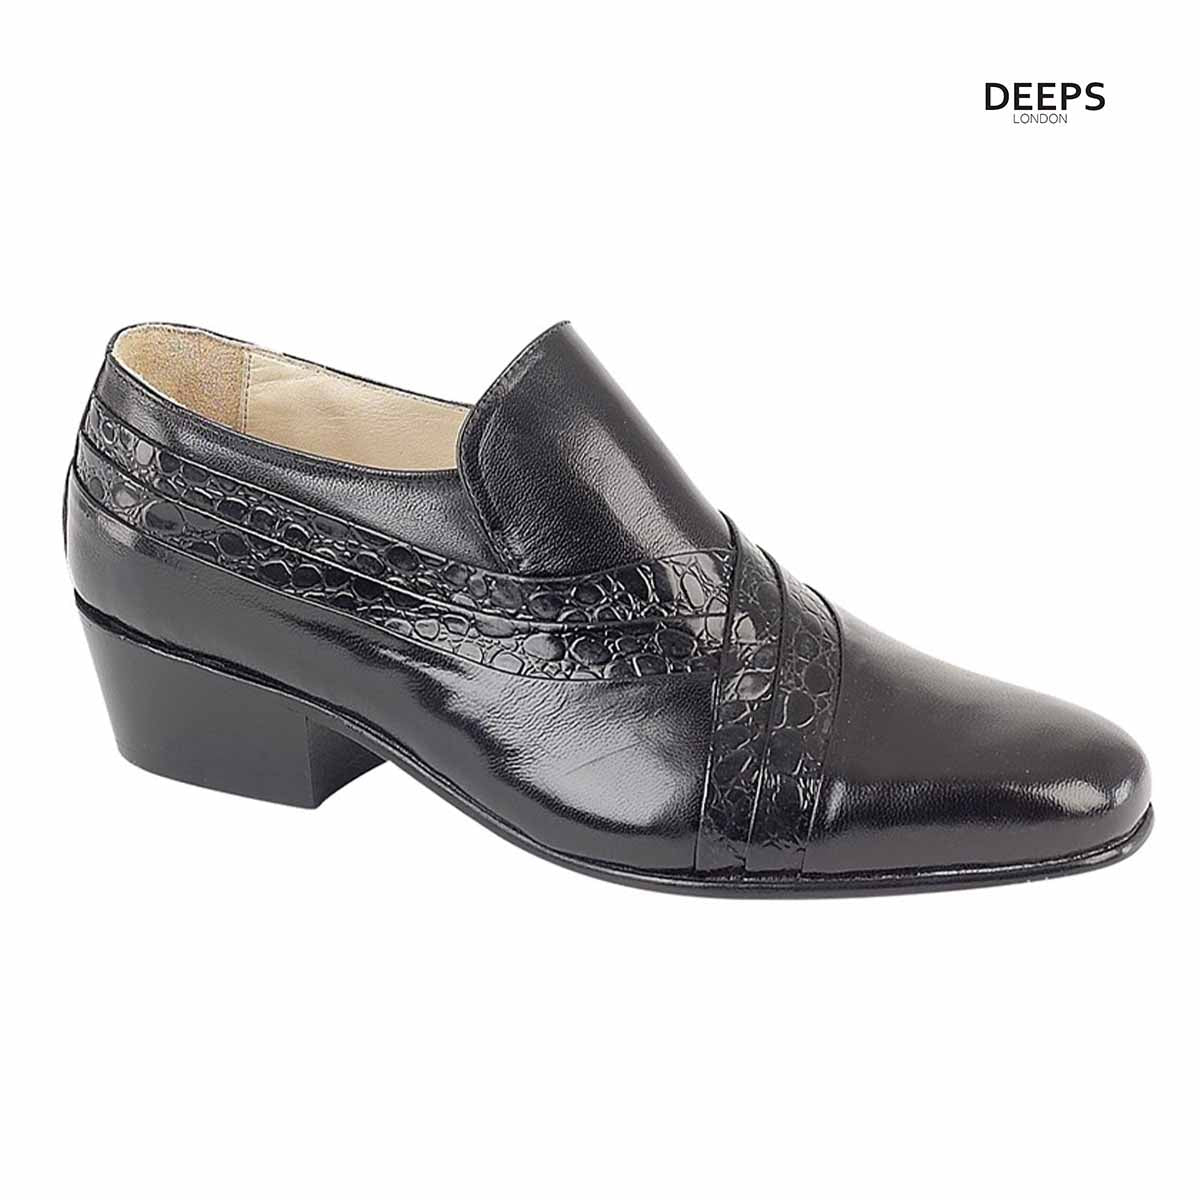 CANOR - MEN'S CUBAN HEEL FORMAL CASUAL PARTY WEDDING LEATHER SHOES BLACK